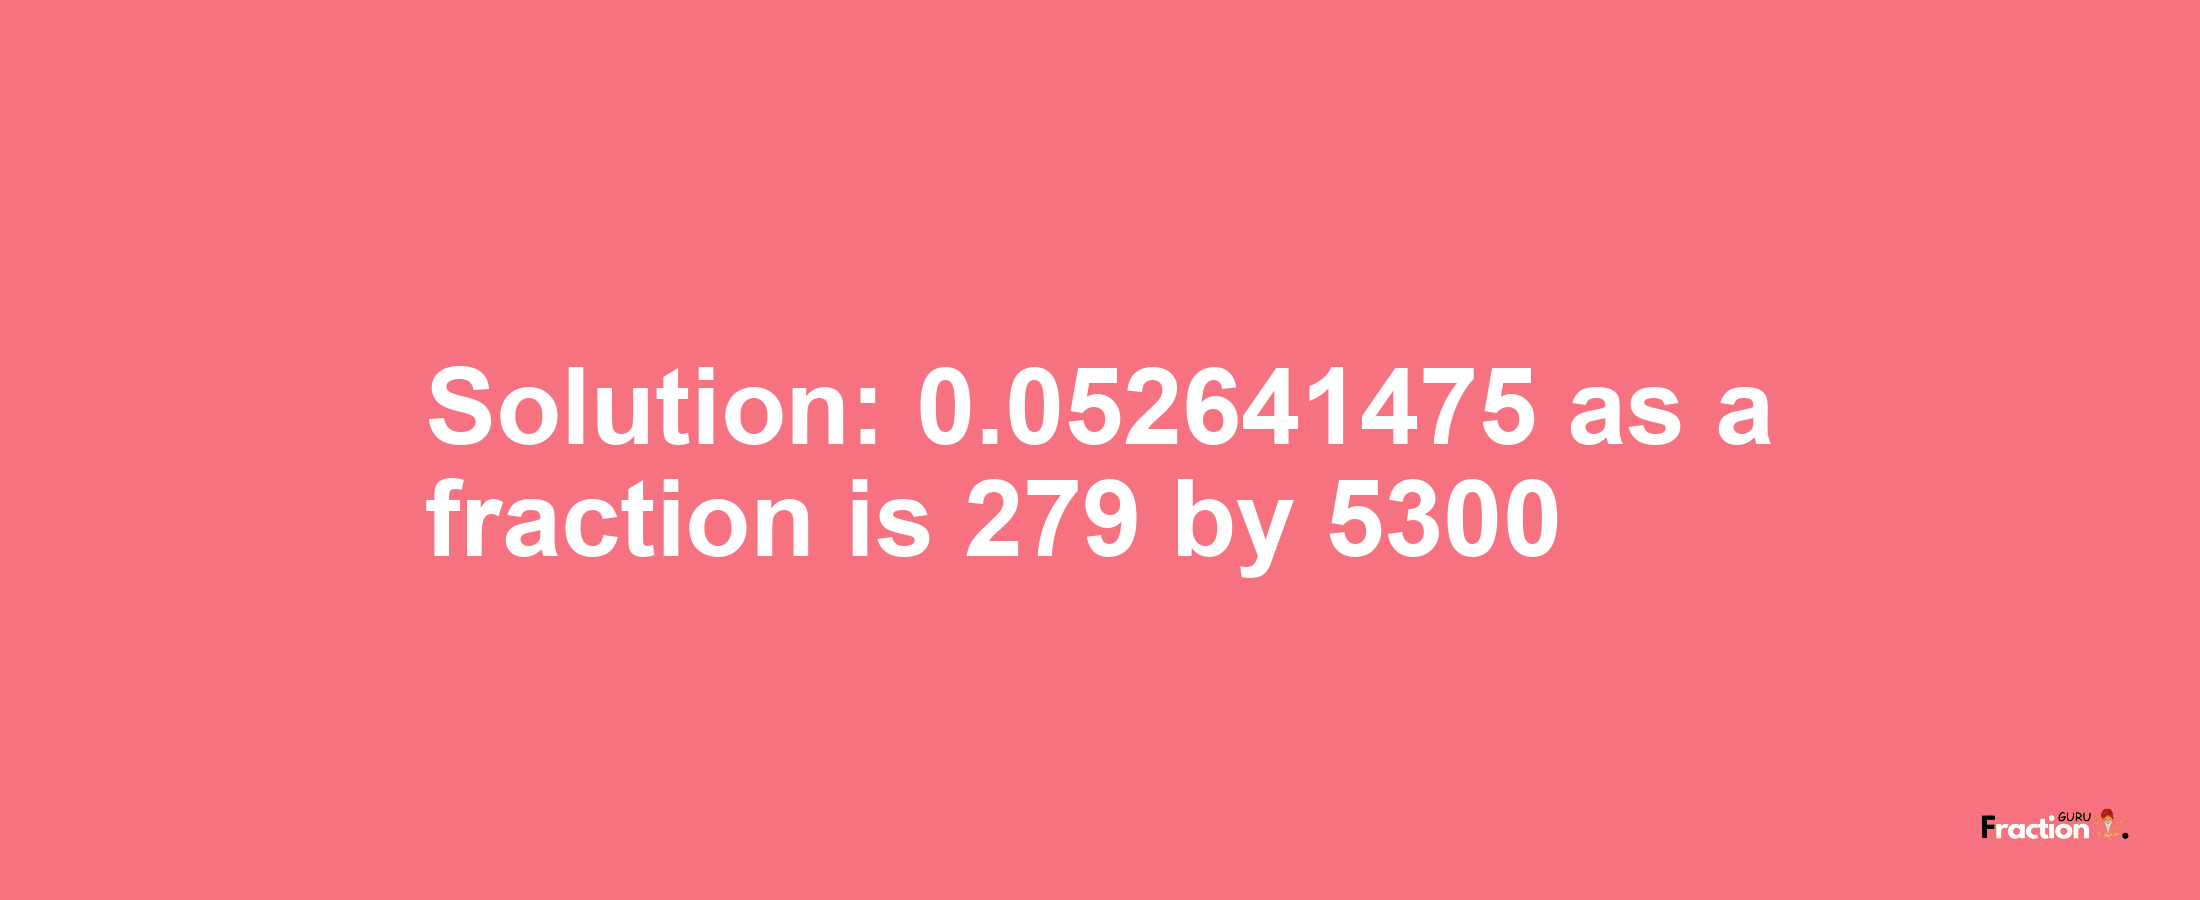 Solution:0.052641475 as a fraction is 279/5300